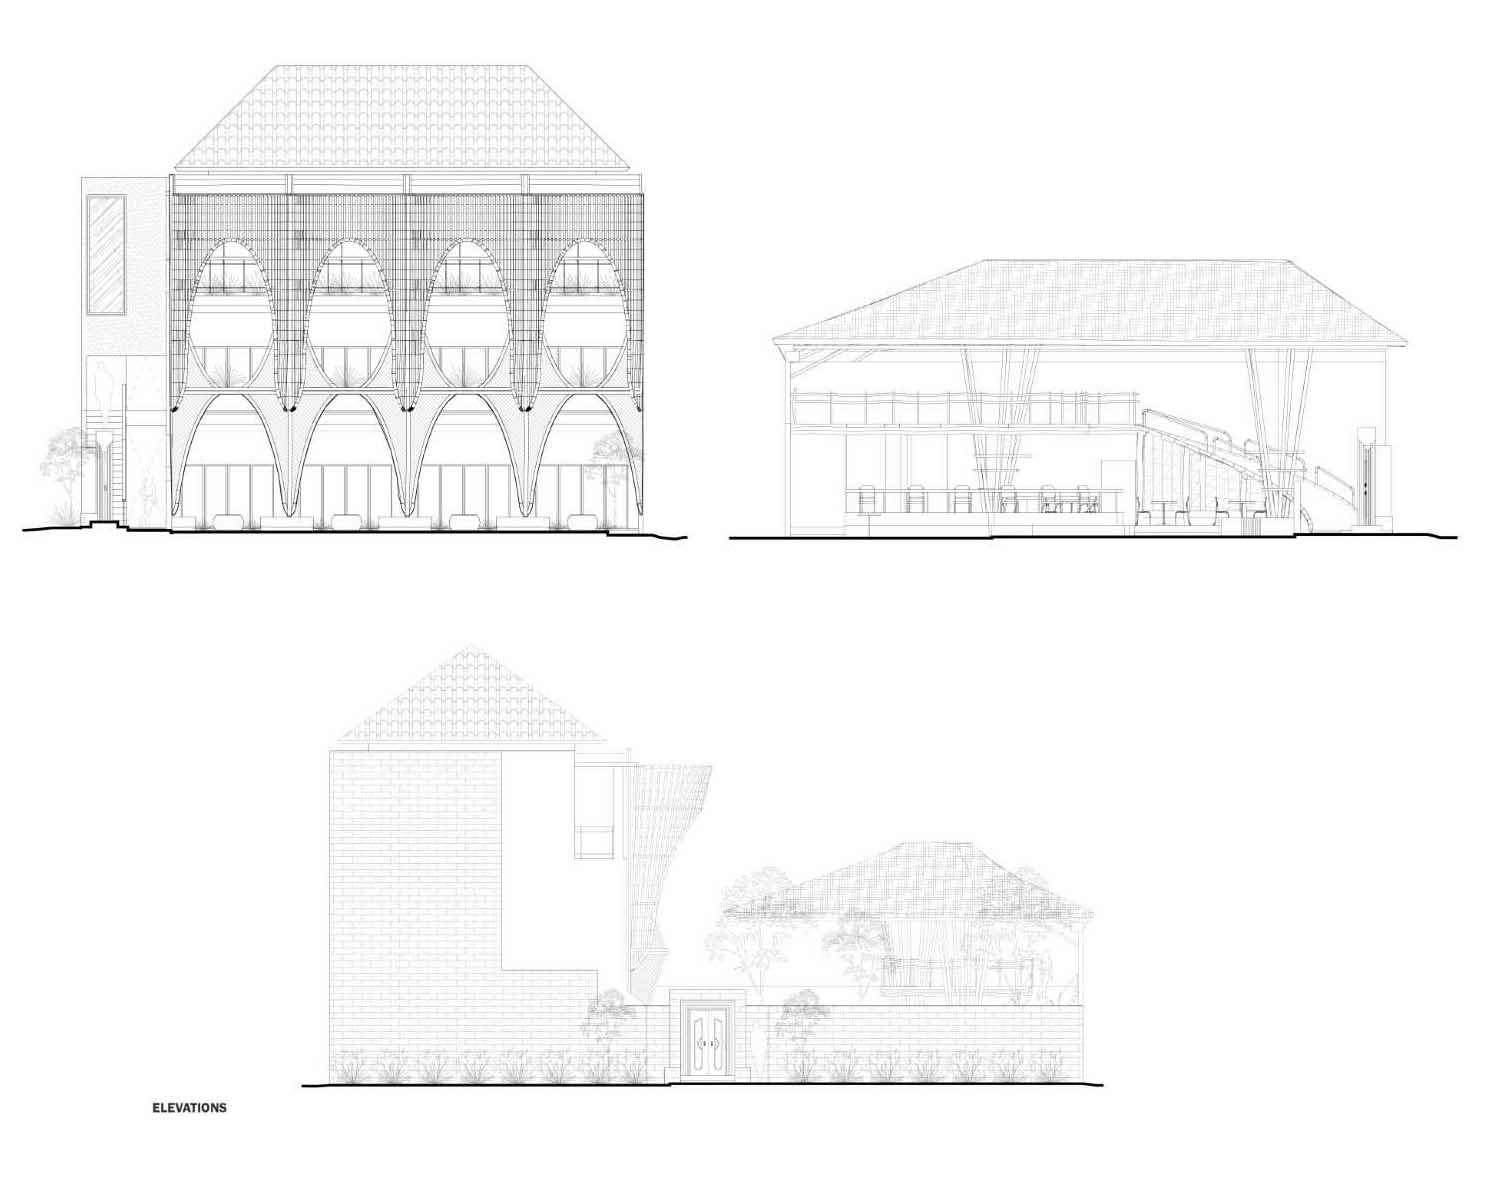 The elevations for a micro-living property.